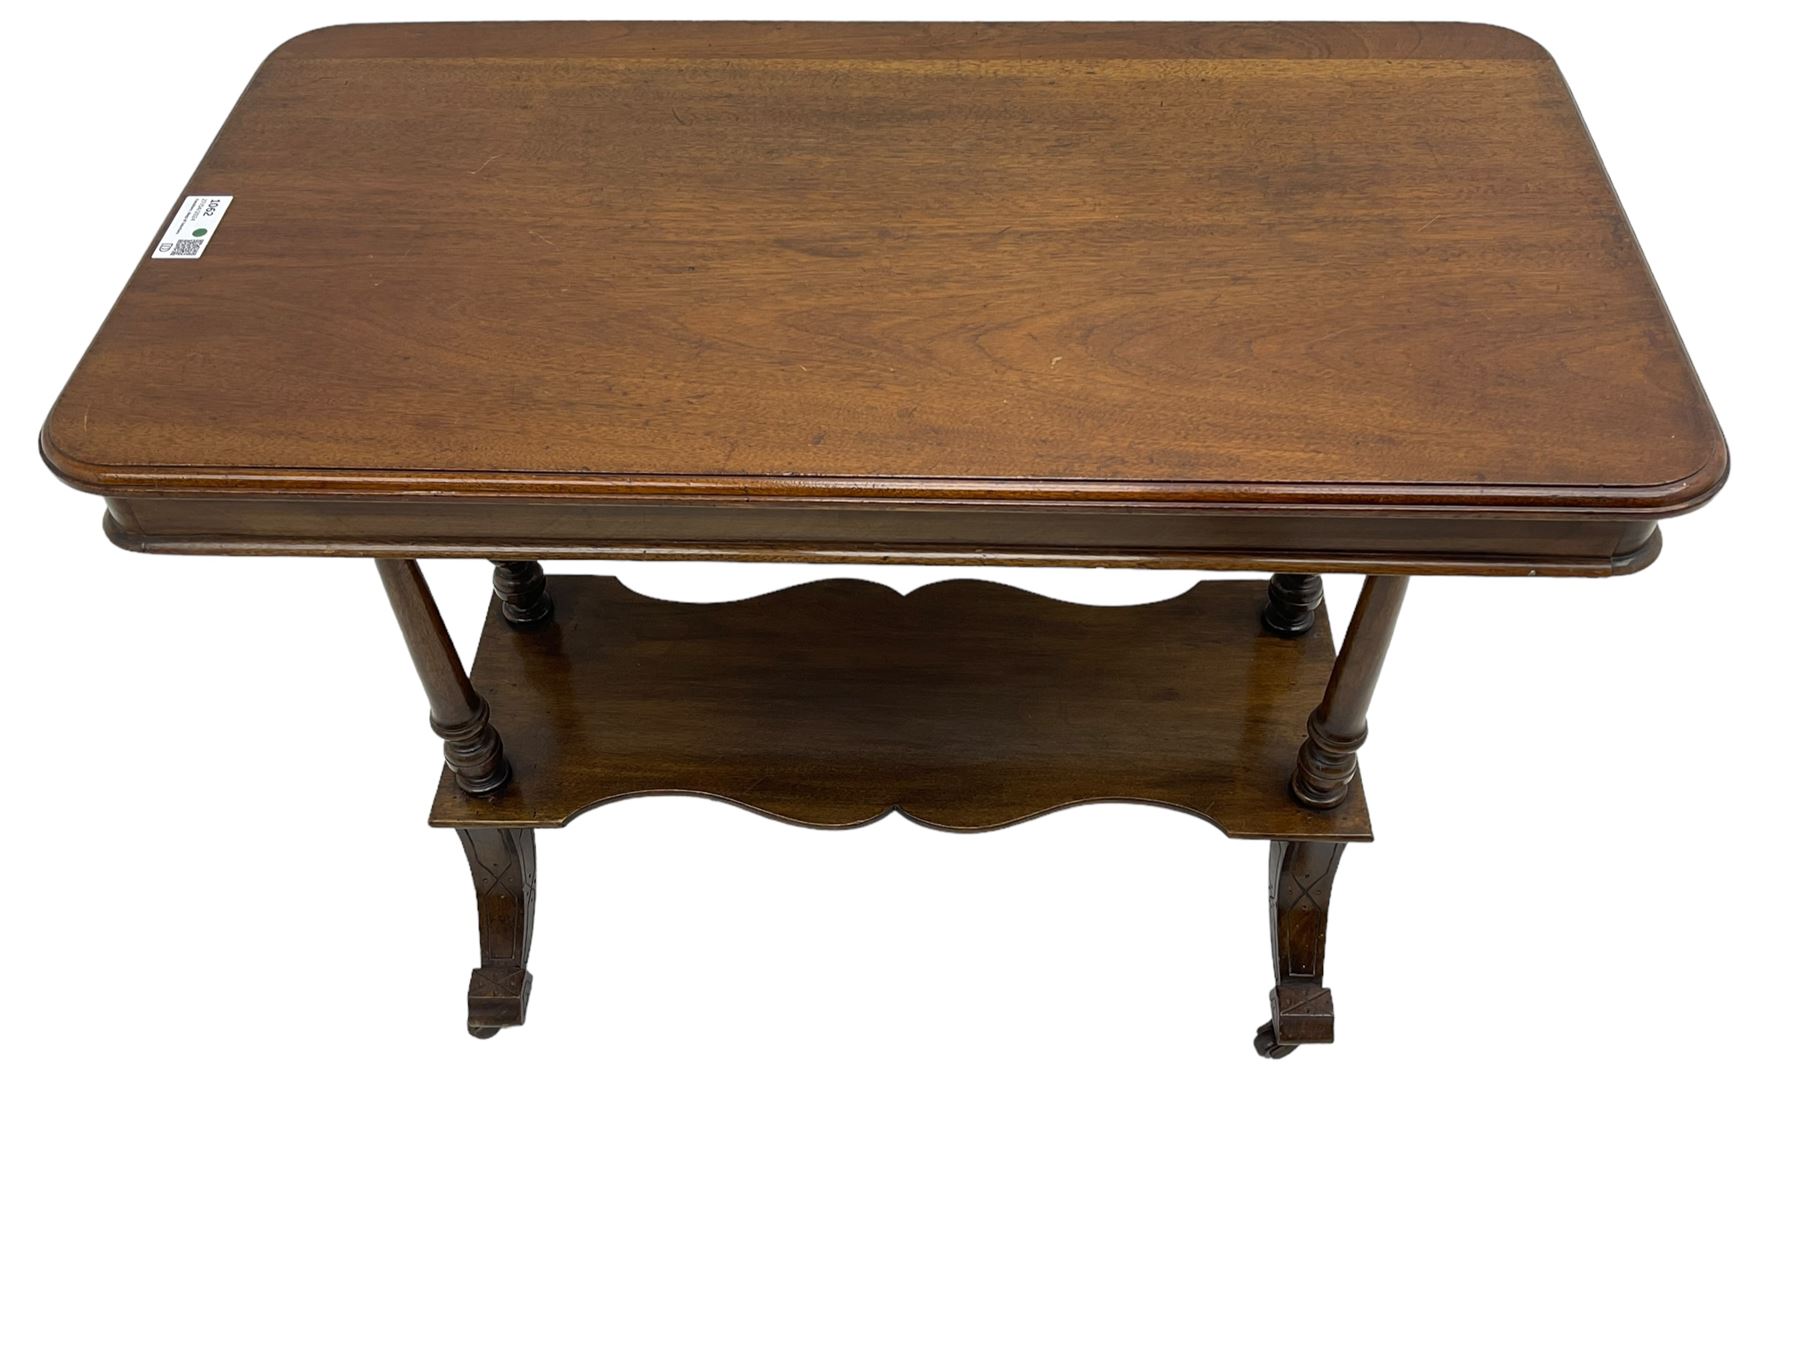 Late Victorian mahogany Aesthetic movement side table - Image 4 of 8